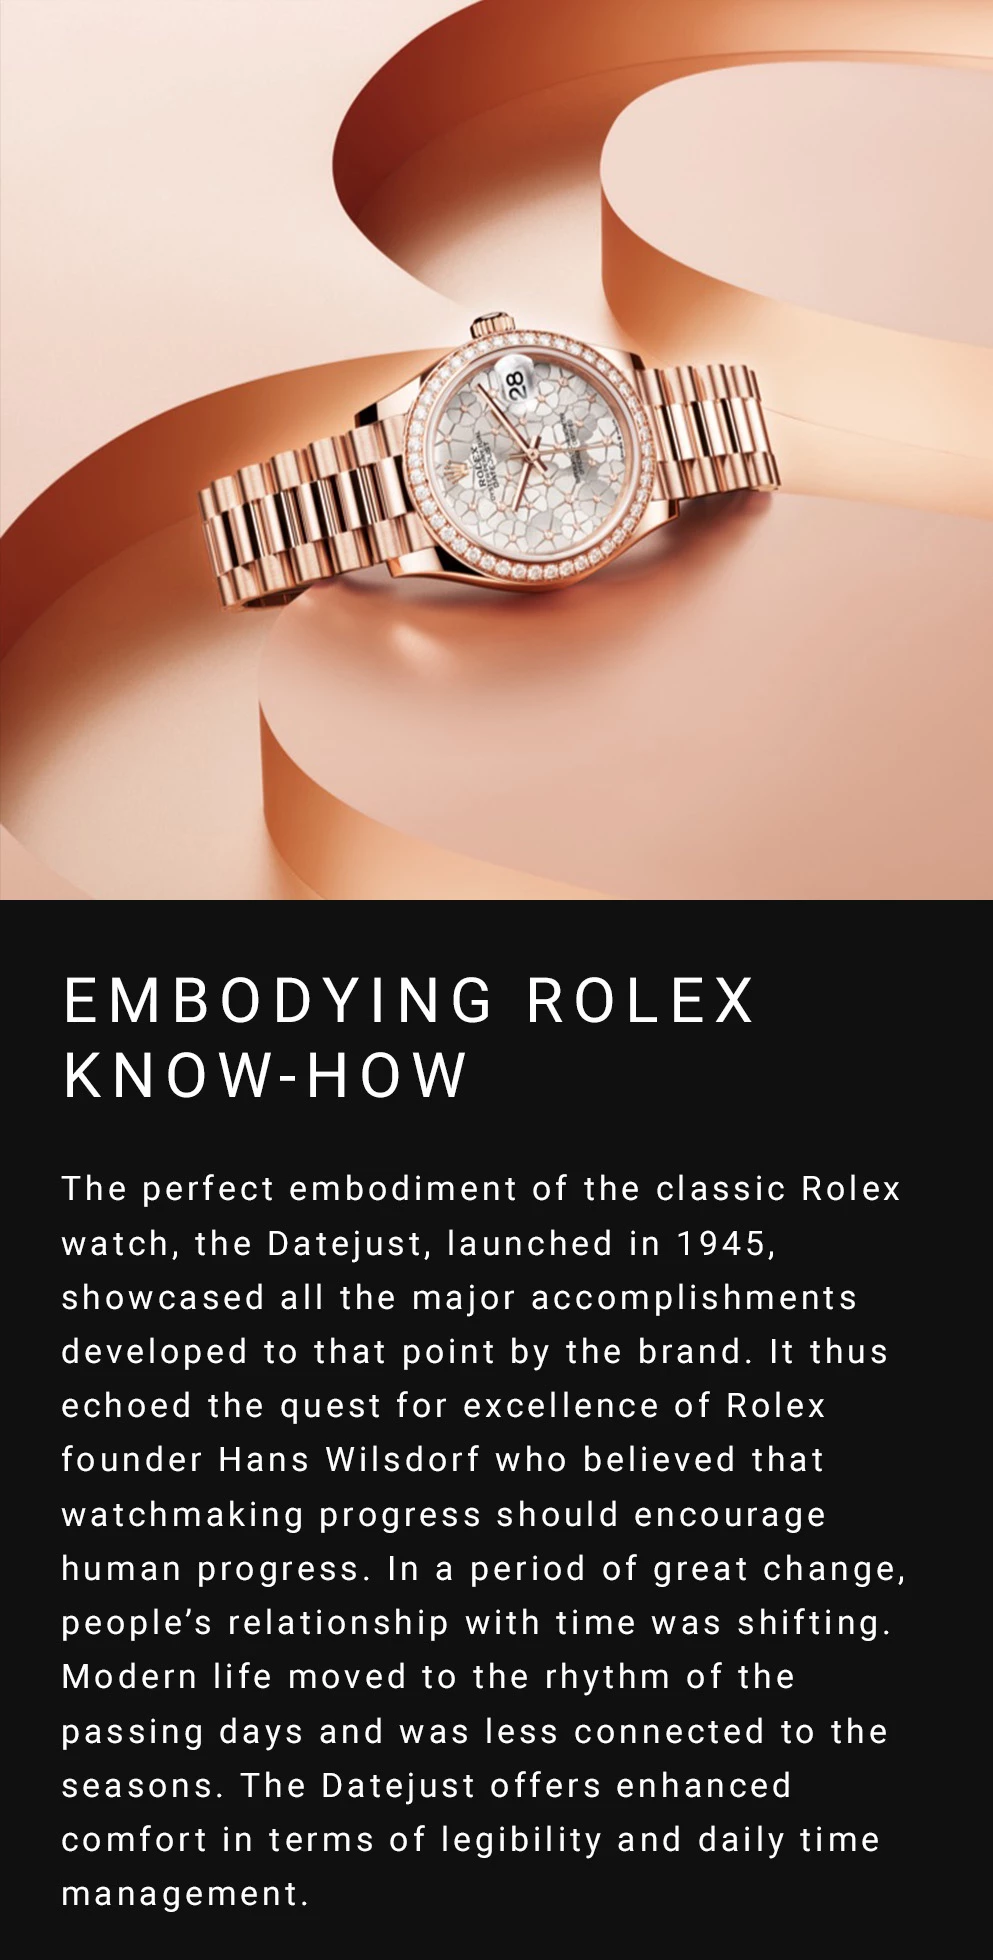 Embodying Rolex know-how